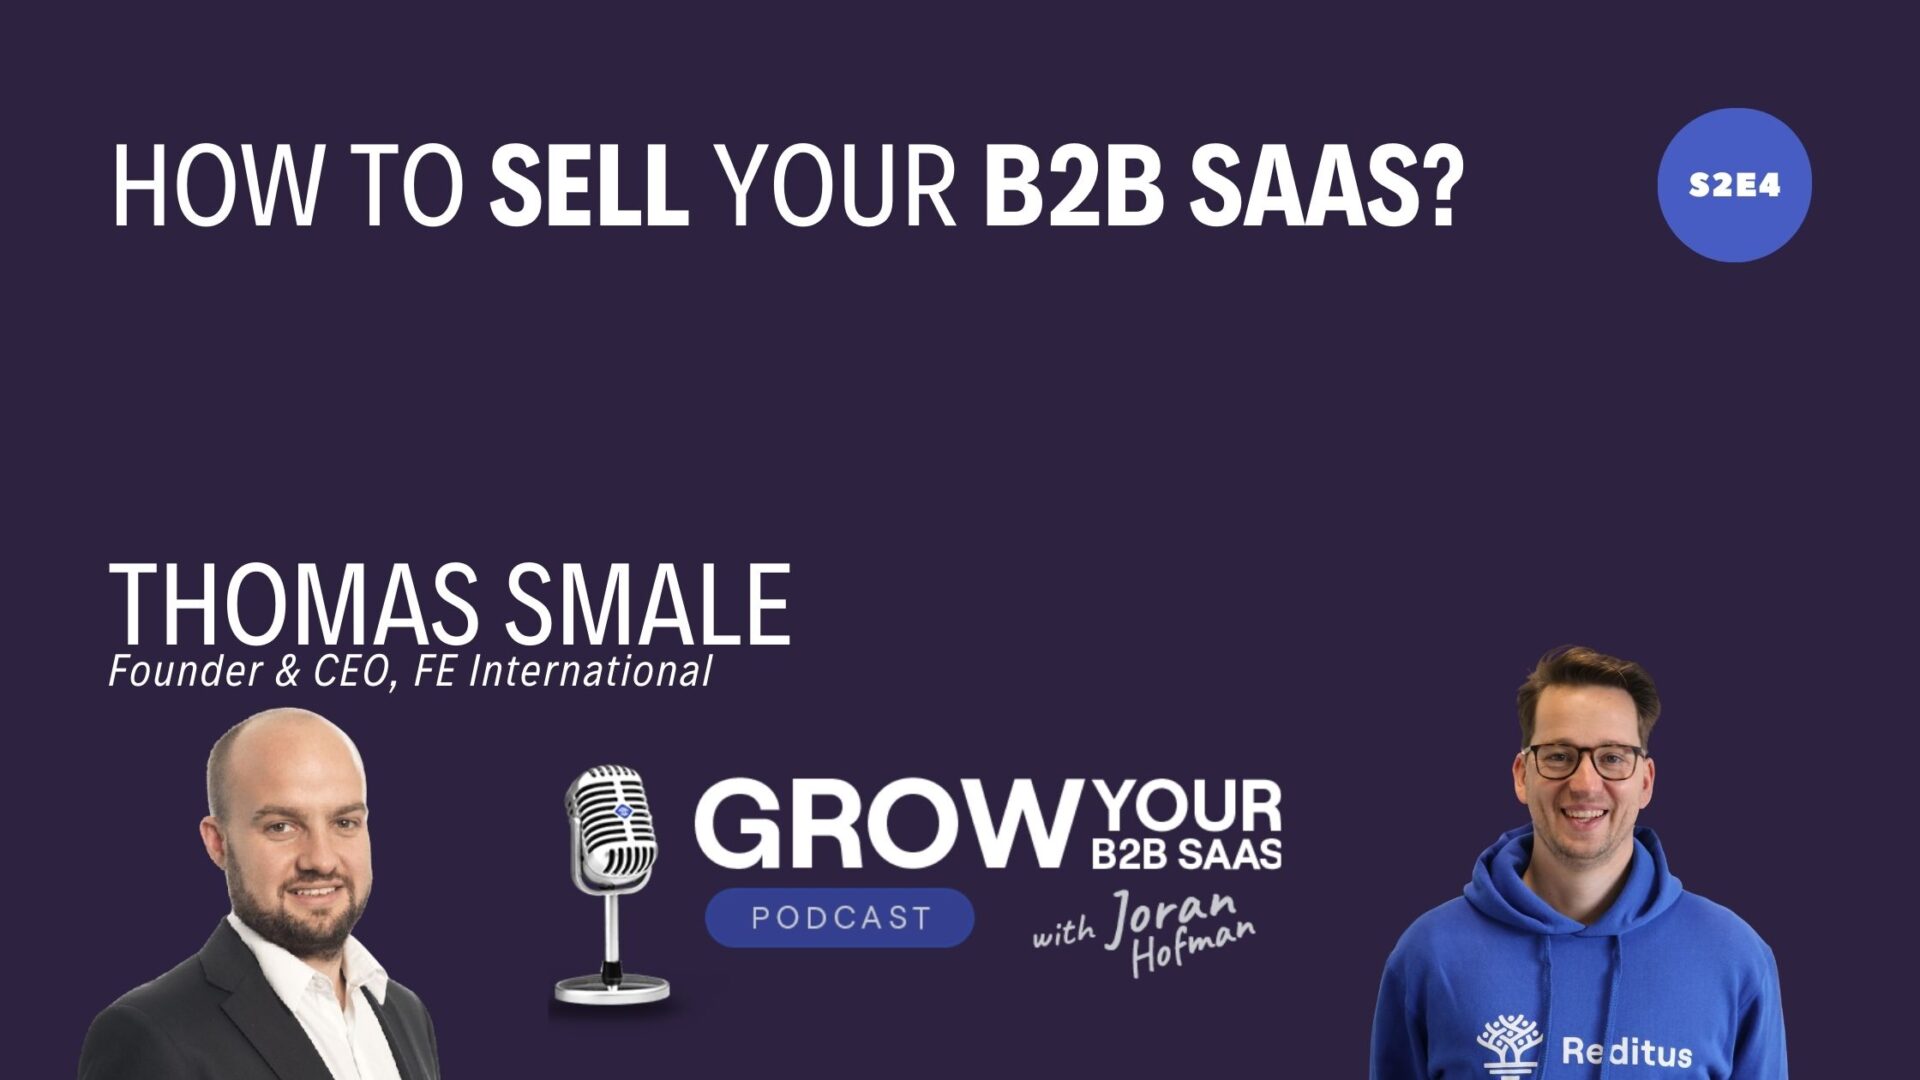 https://www.getreditus.com/podcast/s2e4-how-to-sell-your-b2b-saas-with-thomas-smale/